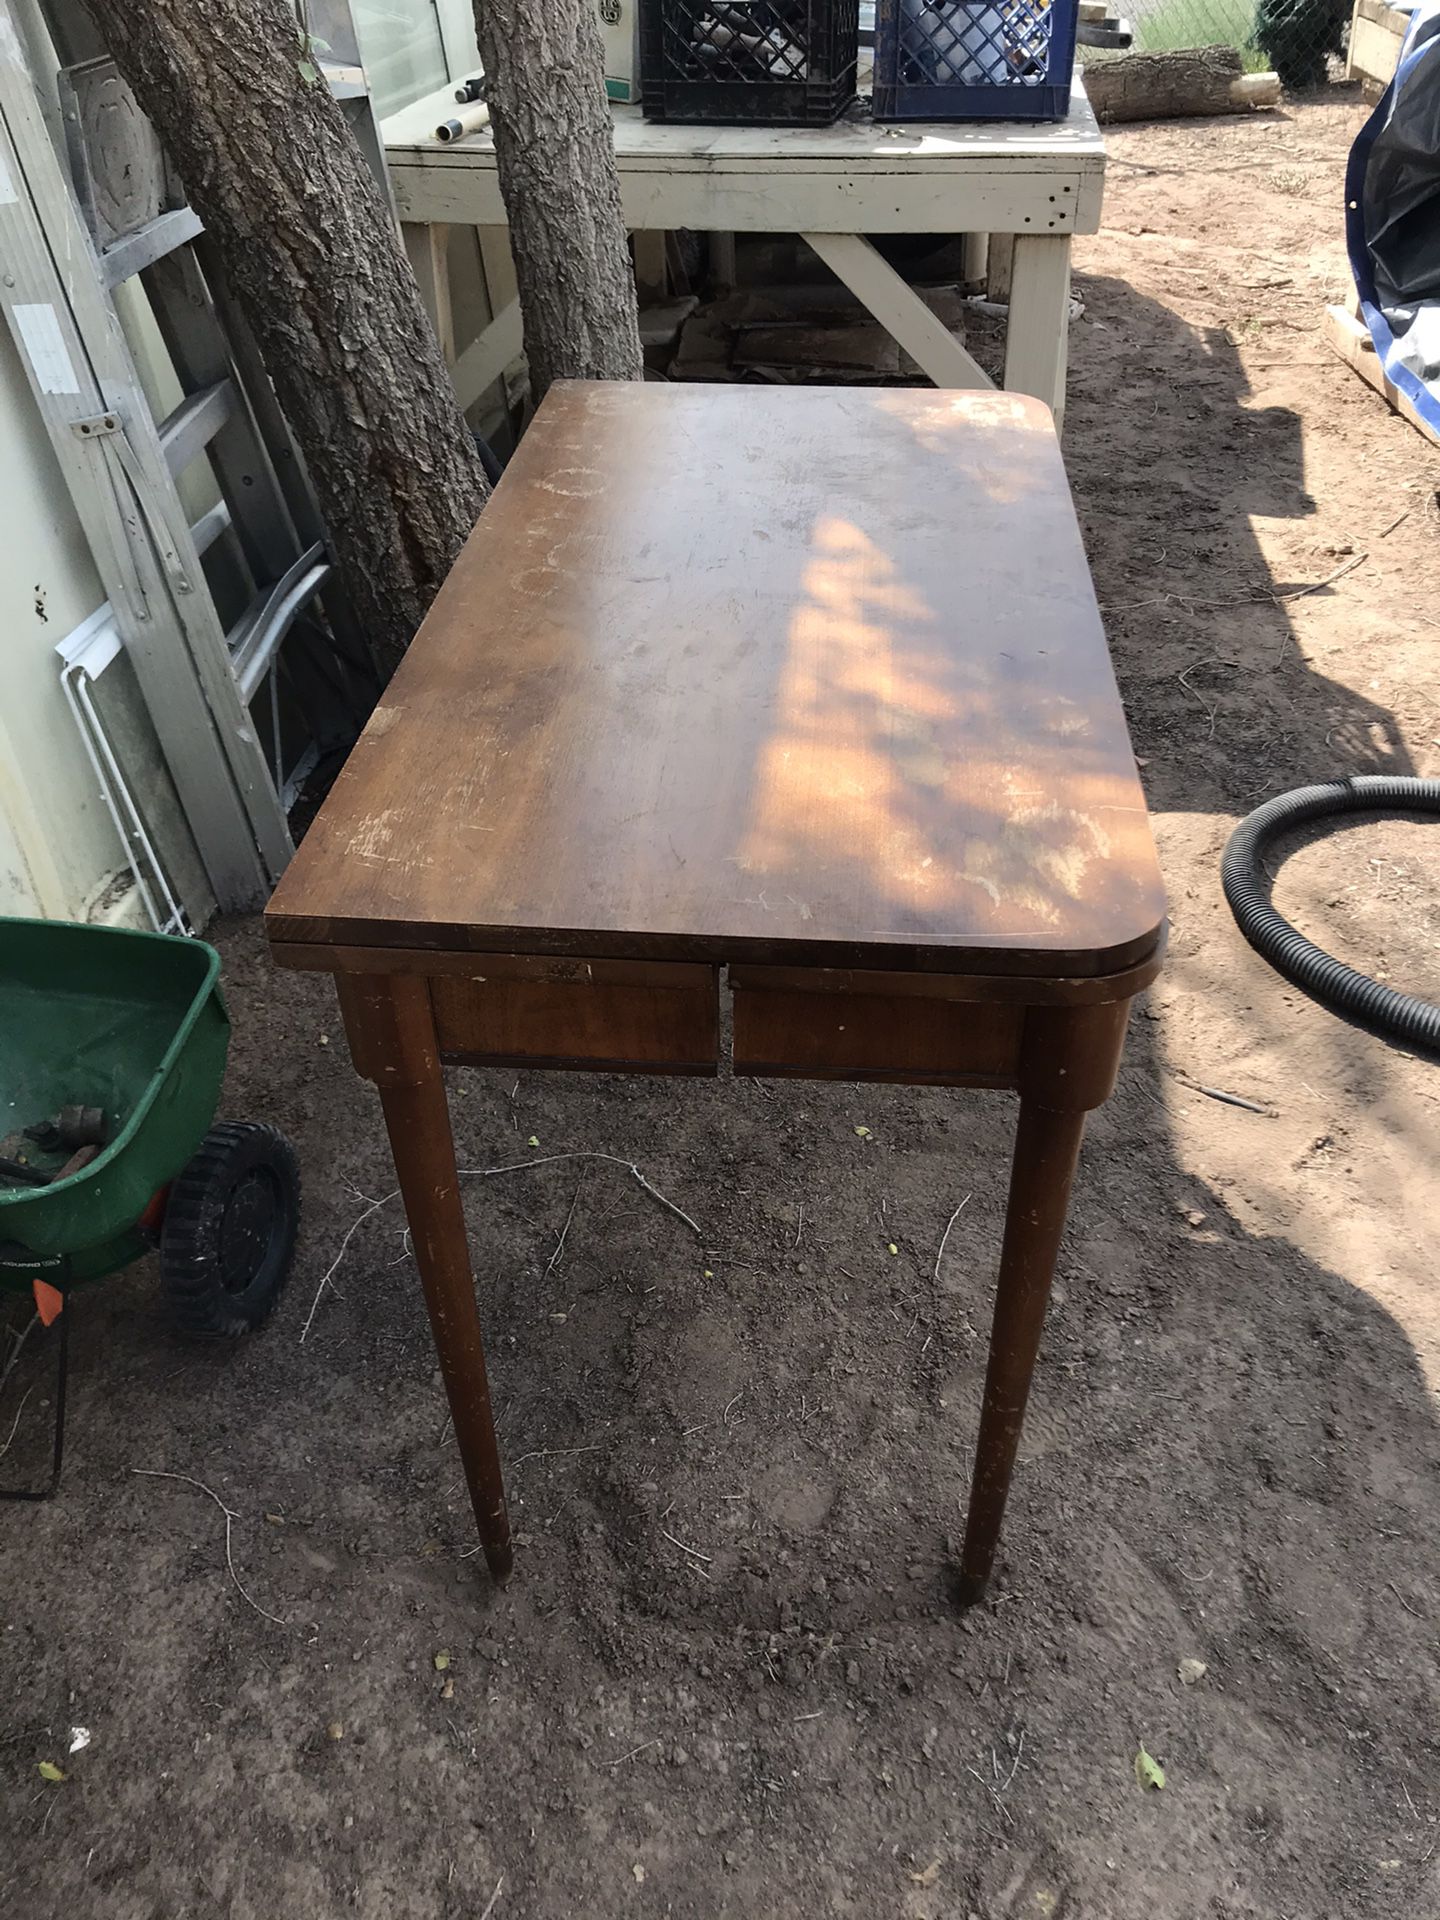 Antique Mid Century table for sale $100 or best offer